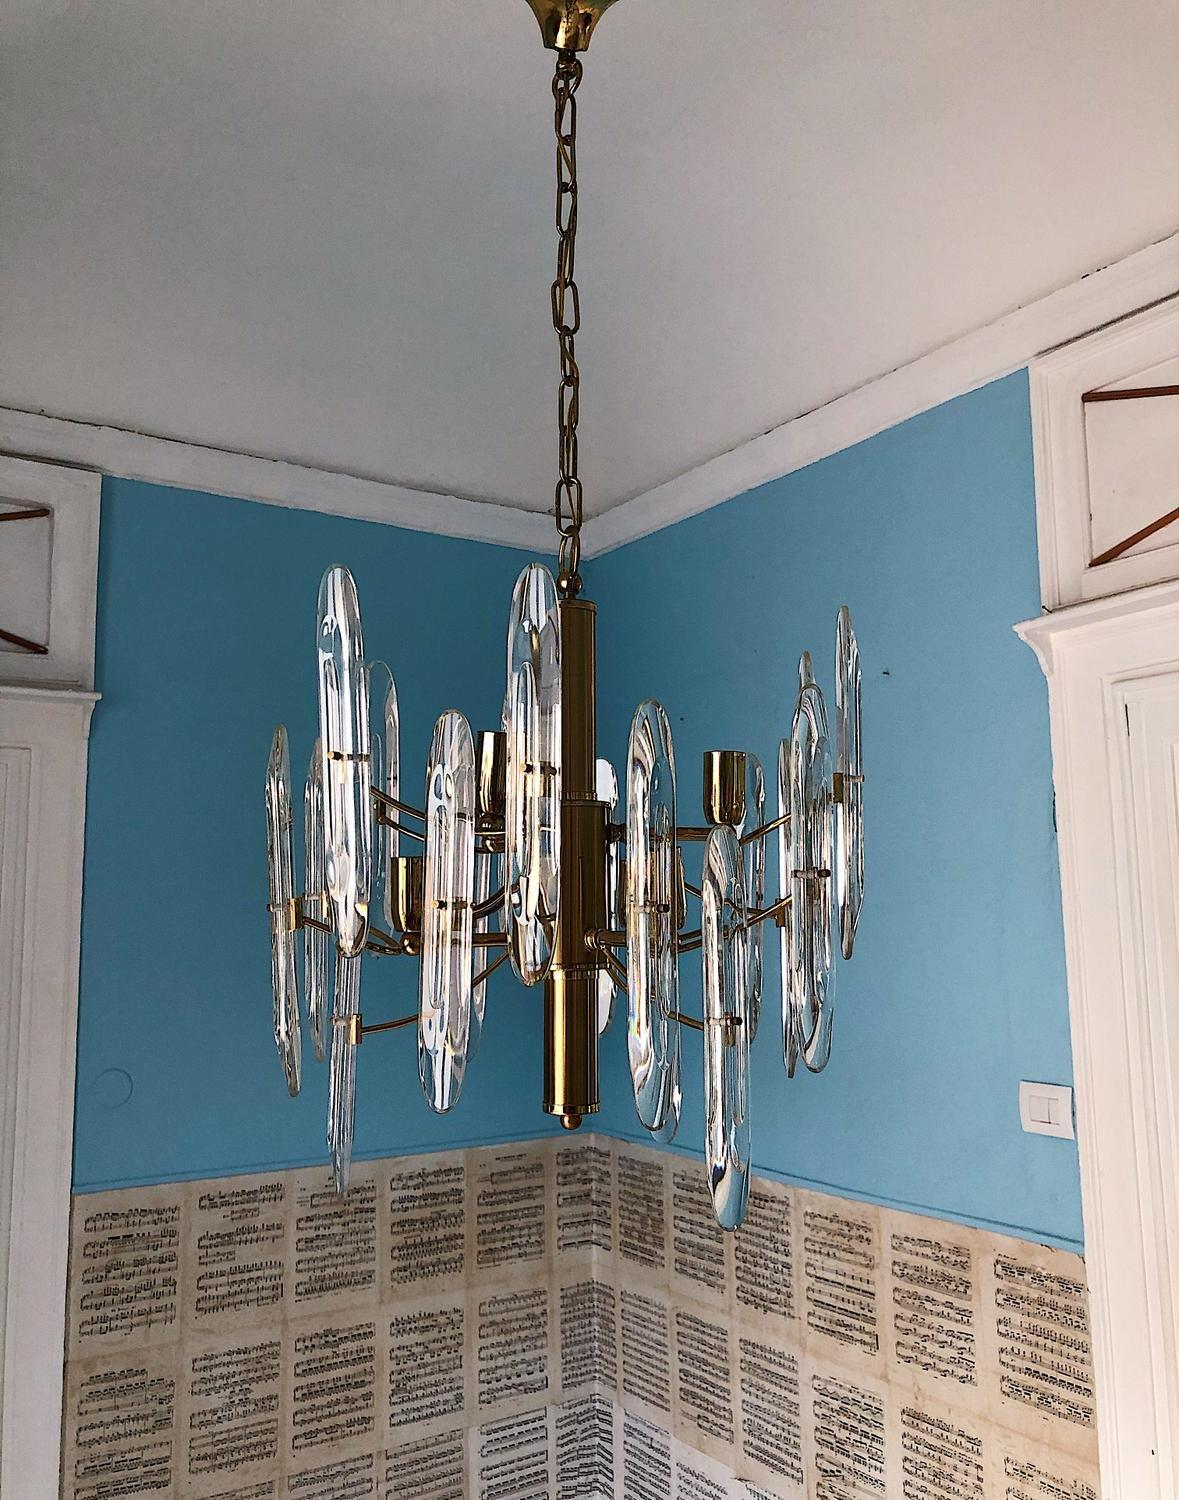 Gorgeous 6 armed chandelier by Gaetano Sciolari, 1970s, Italy.
18 crystal galsses set on a metal base. 6 Light bulbs.

Details
Creator: Gaetano Sciolari
Dimensions: Height whitout chain 50 cm Height with chain 100 cm Diameter 46 cm. The 18